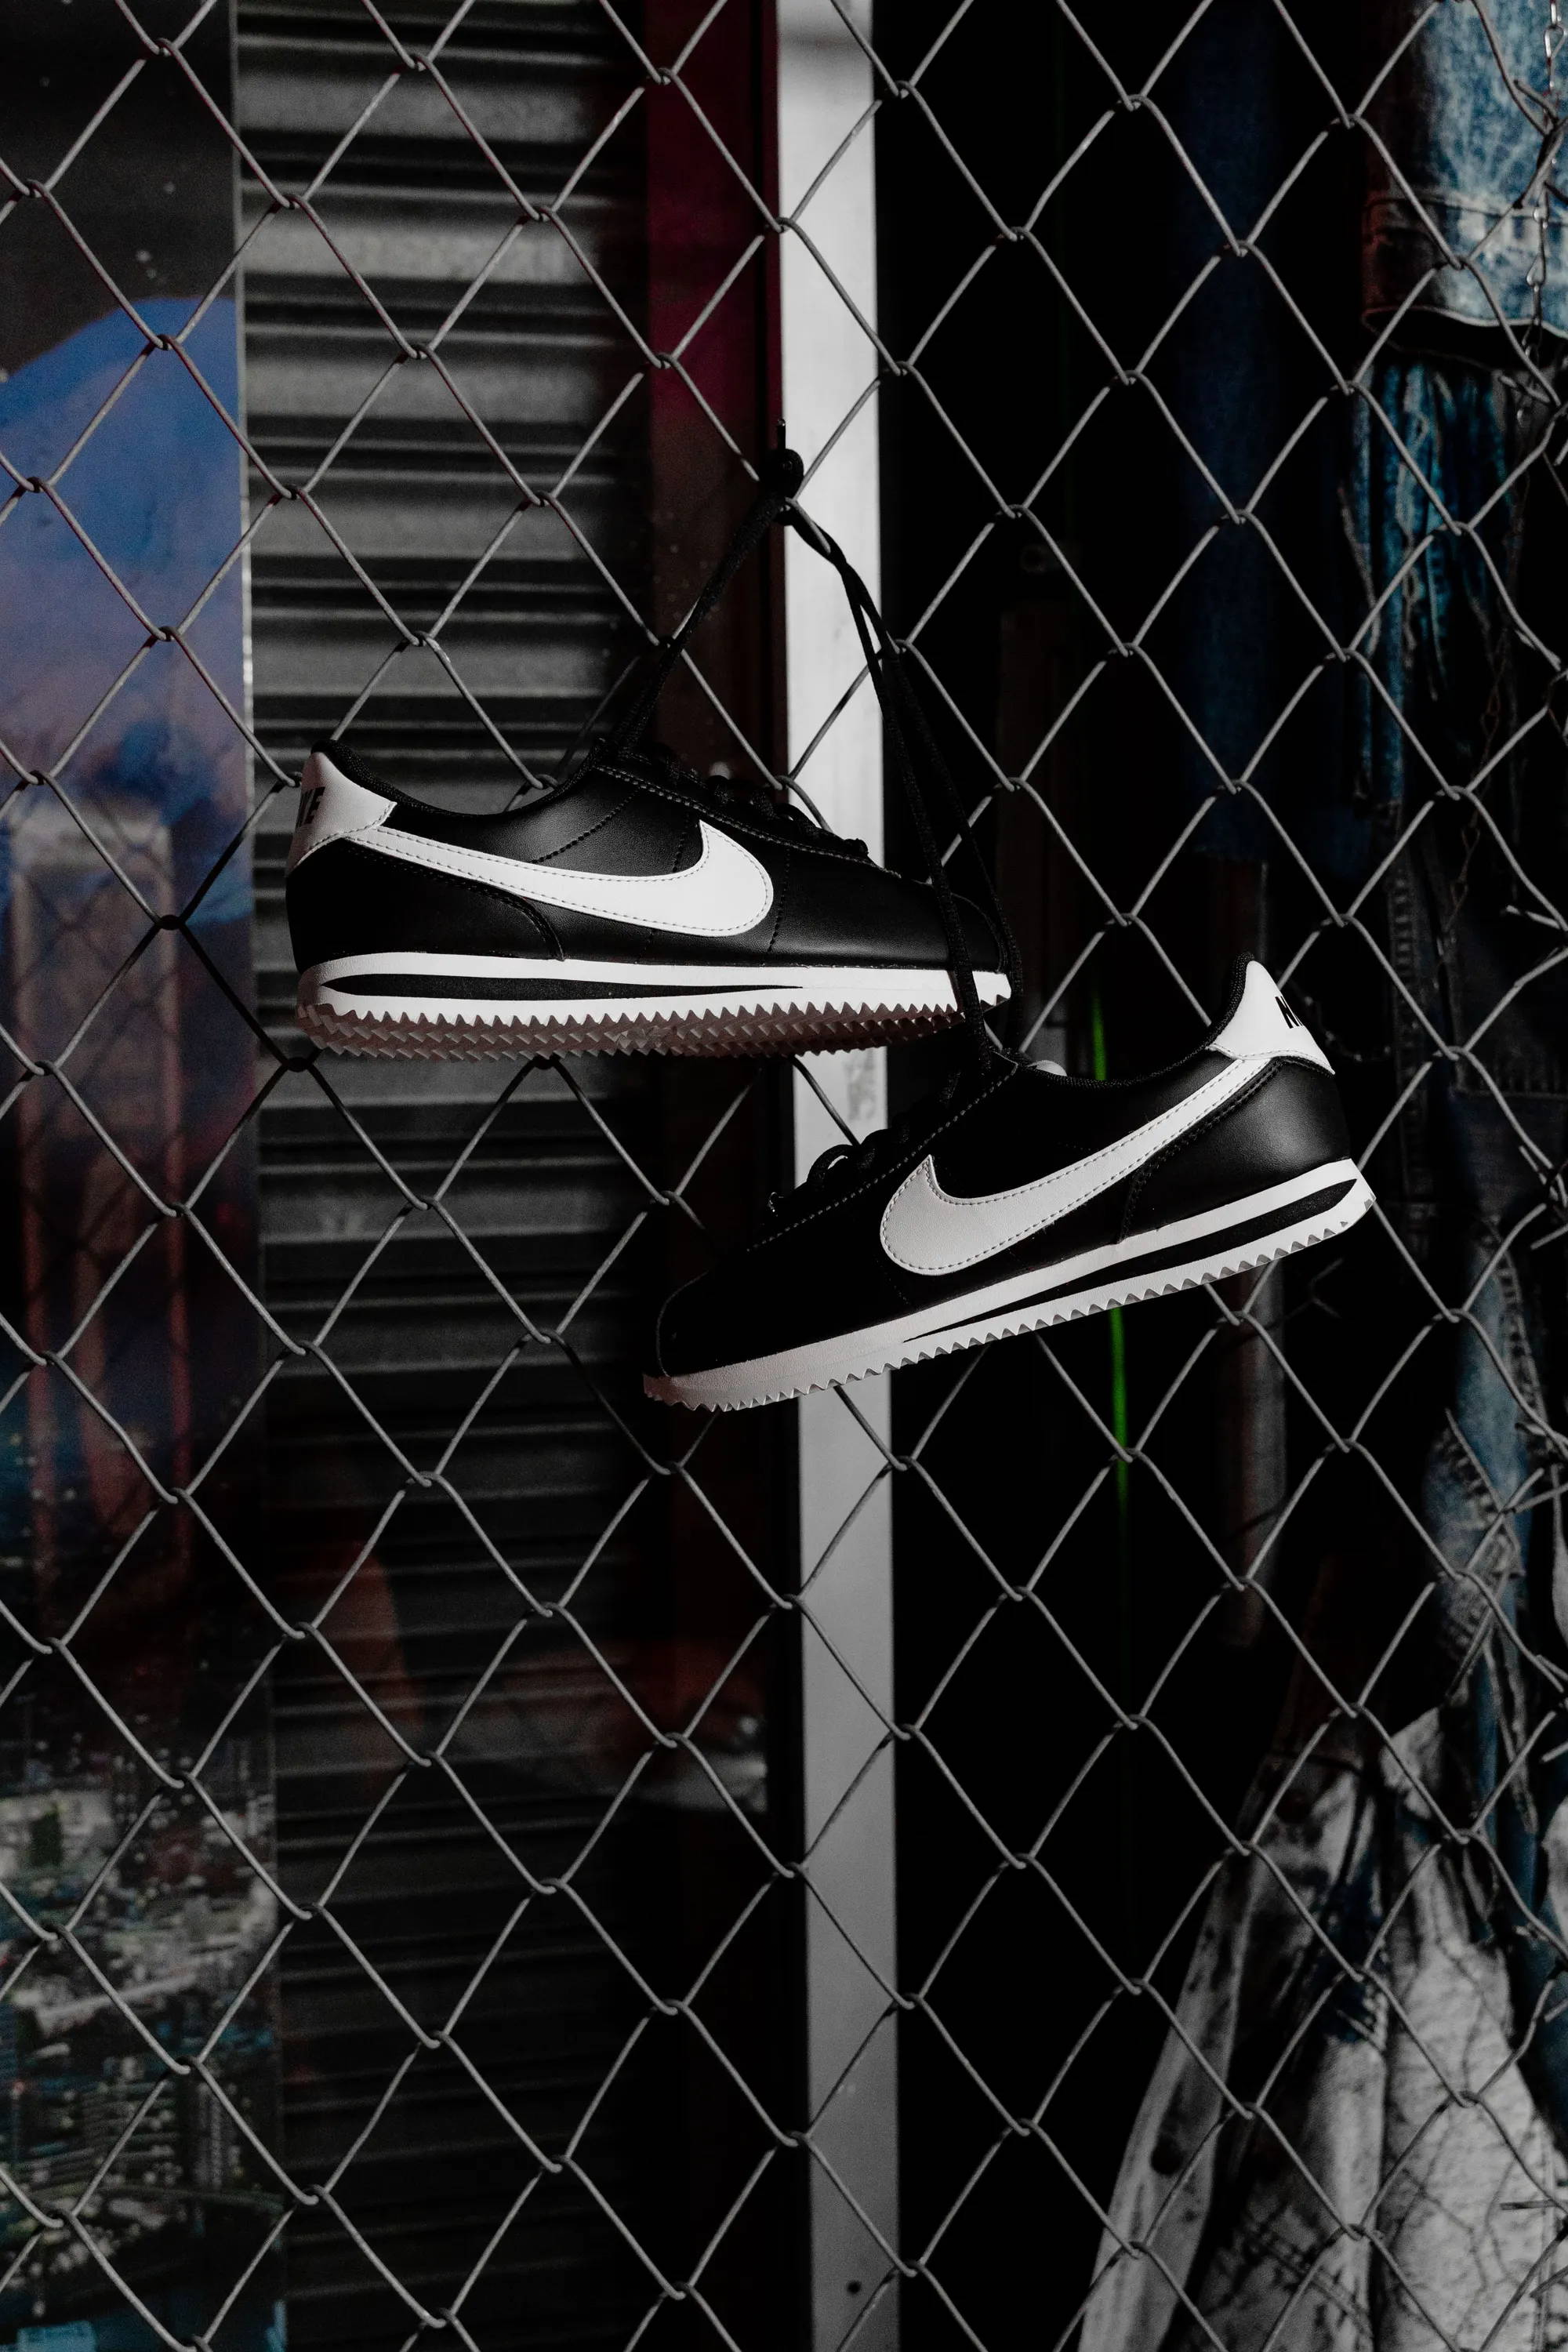 Manual equipaje uno The History of the Nike Cortez | Shoe Palace Blog